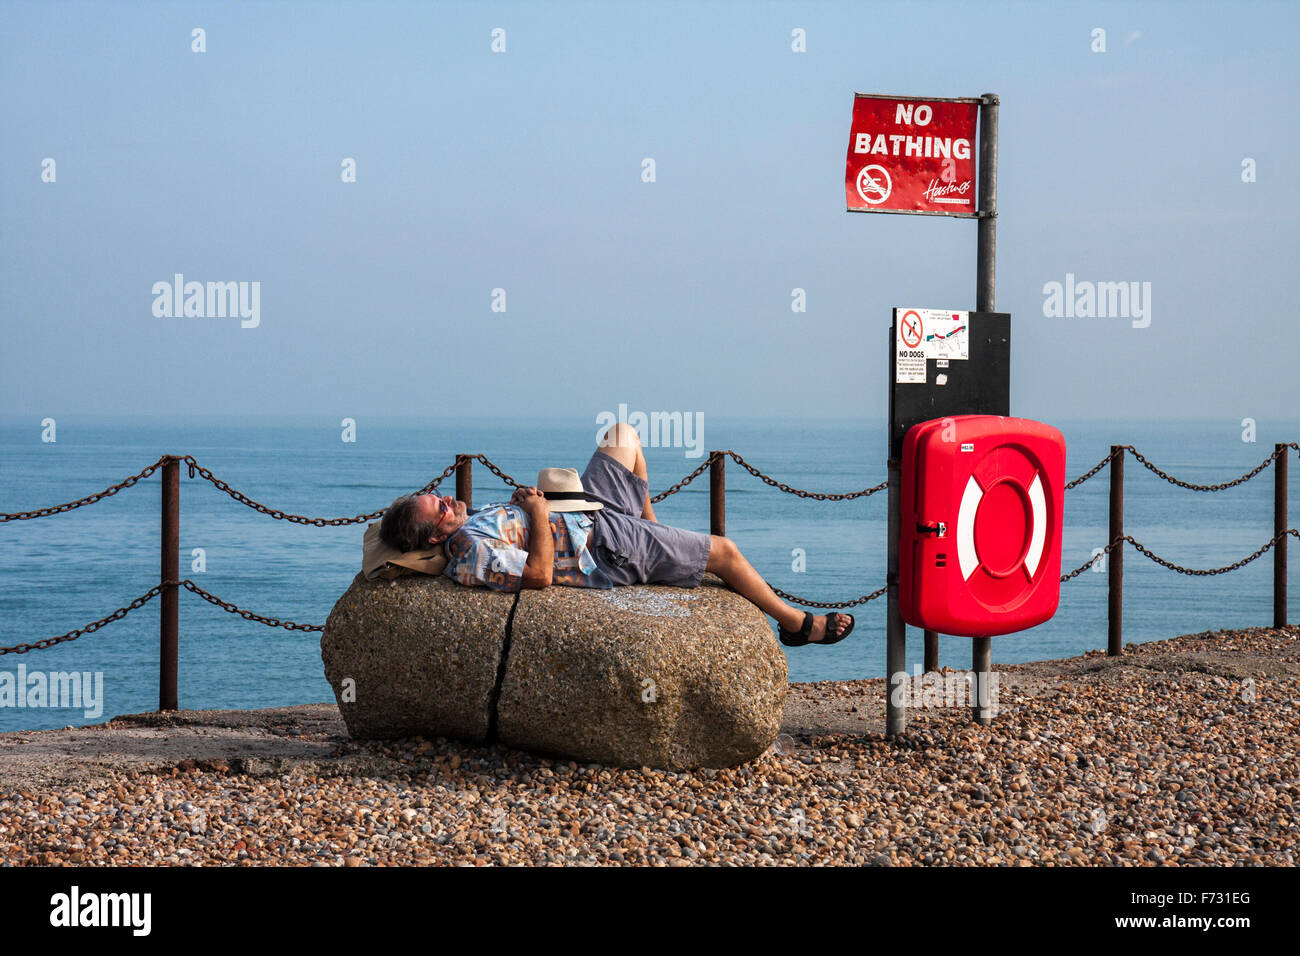 Man resting on a rock at Hastings Seafood Festival on The Stade, Hastings, East Sussex, England, UK Stock Photo